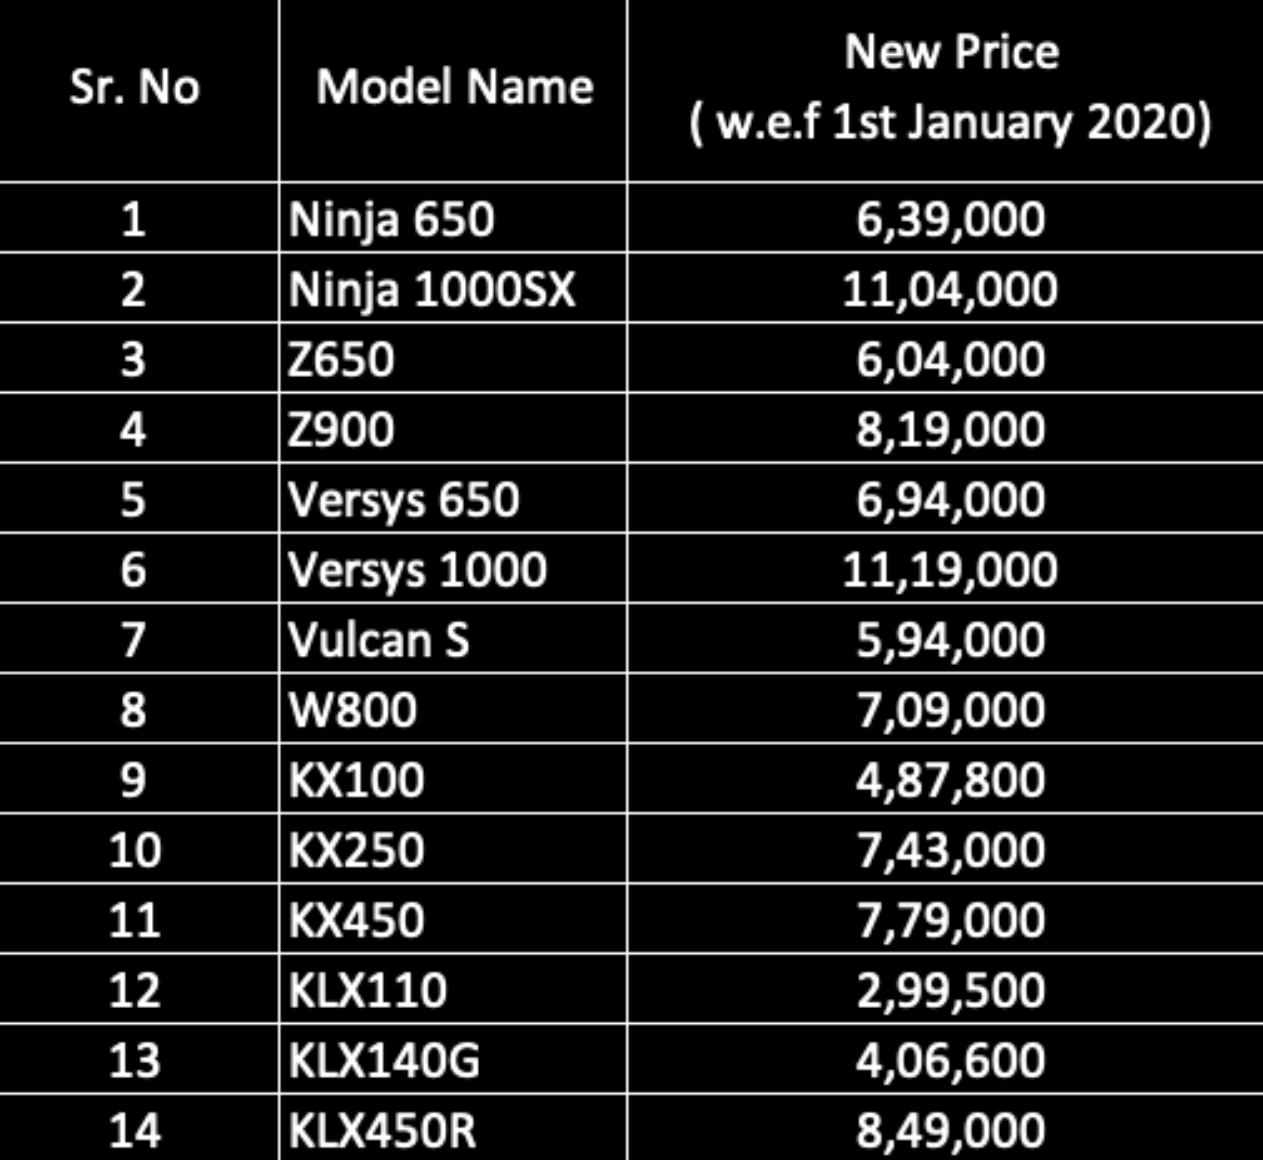 Kawasaki releases new price list; to come into effect from 1 Jan 2021